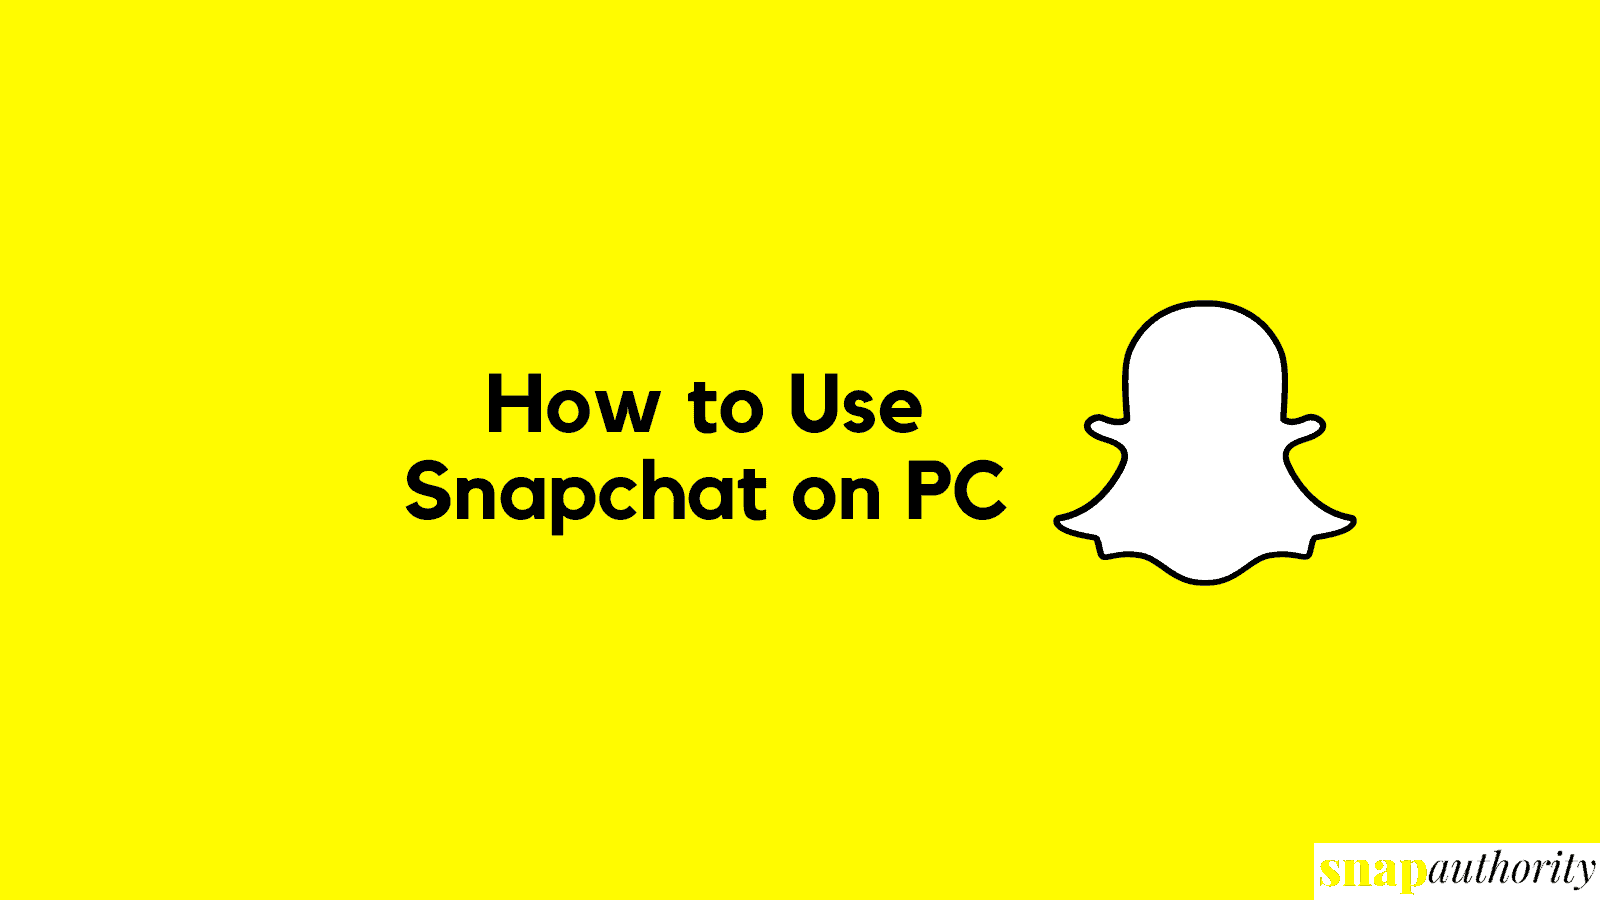 How to Use Snapchat on PC